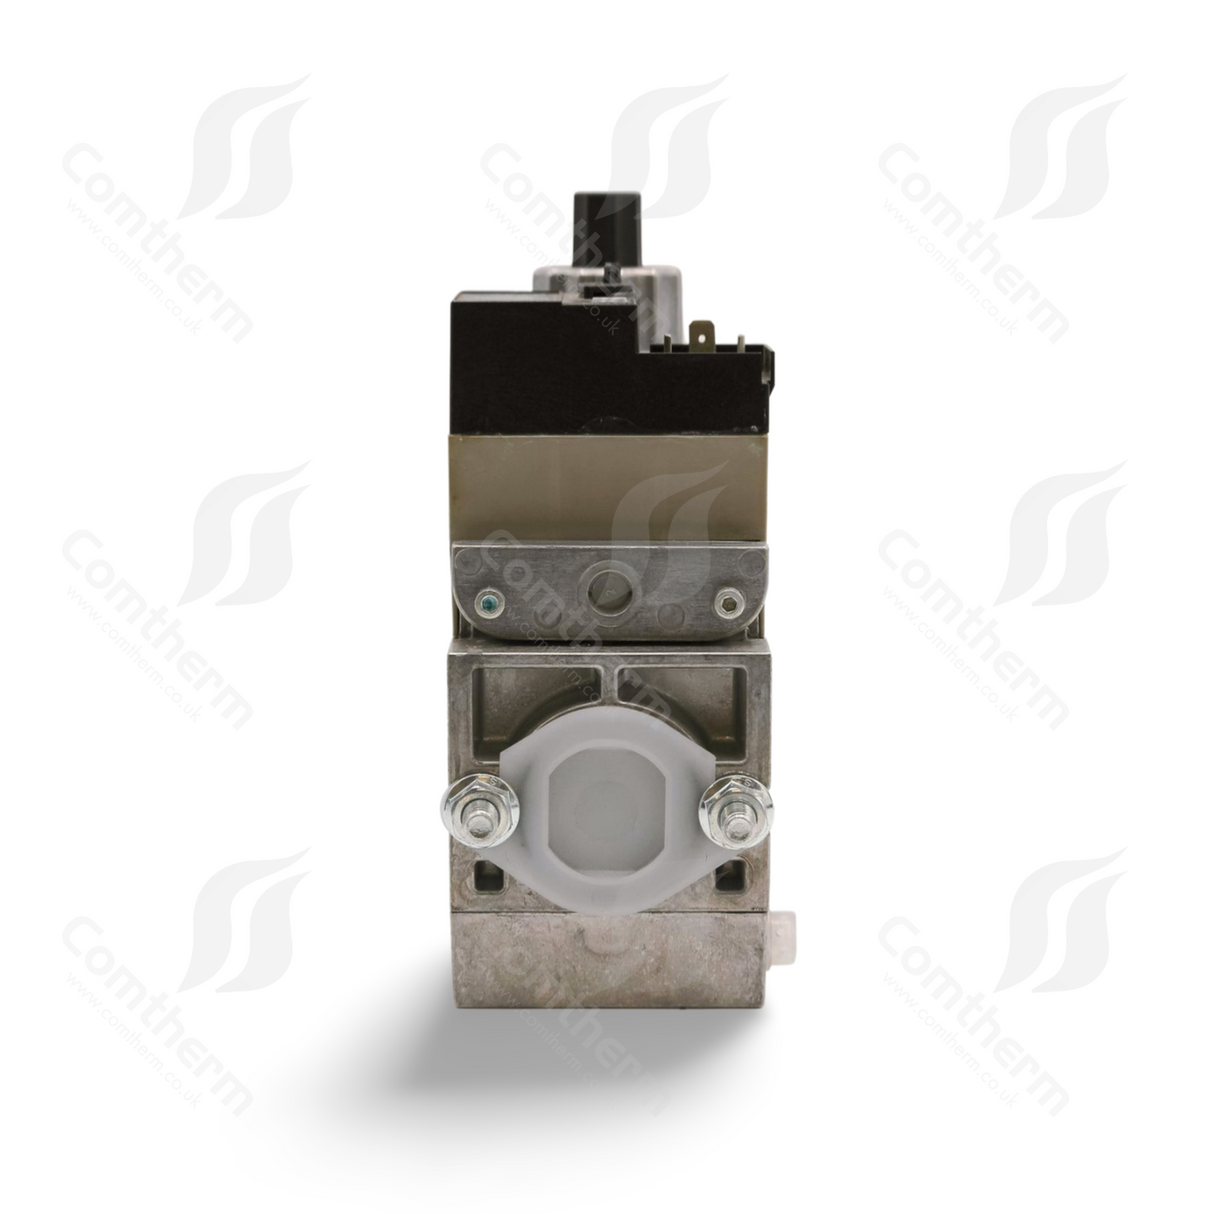 Dungs MB-DLE 410 B01 S20 Multibloc Gas Valve - 230v